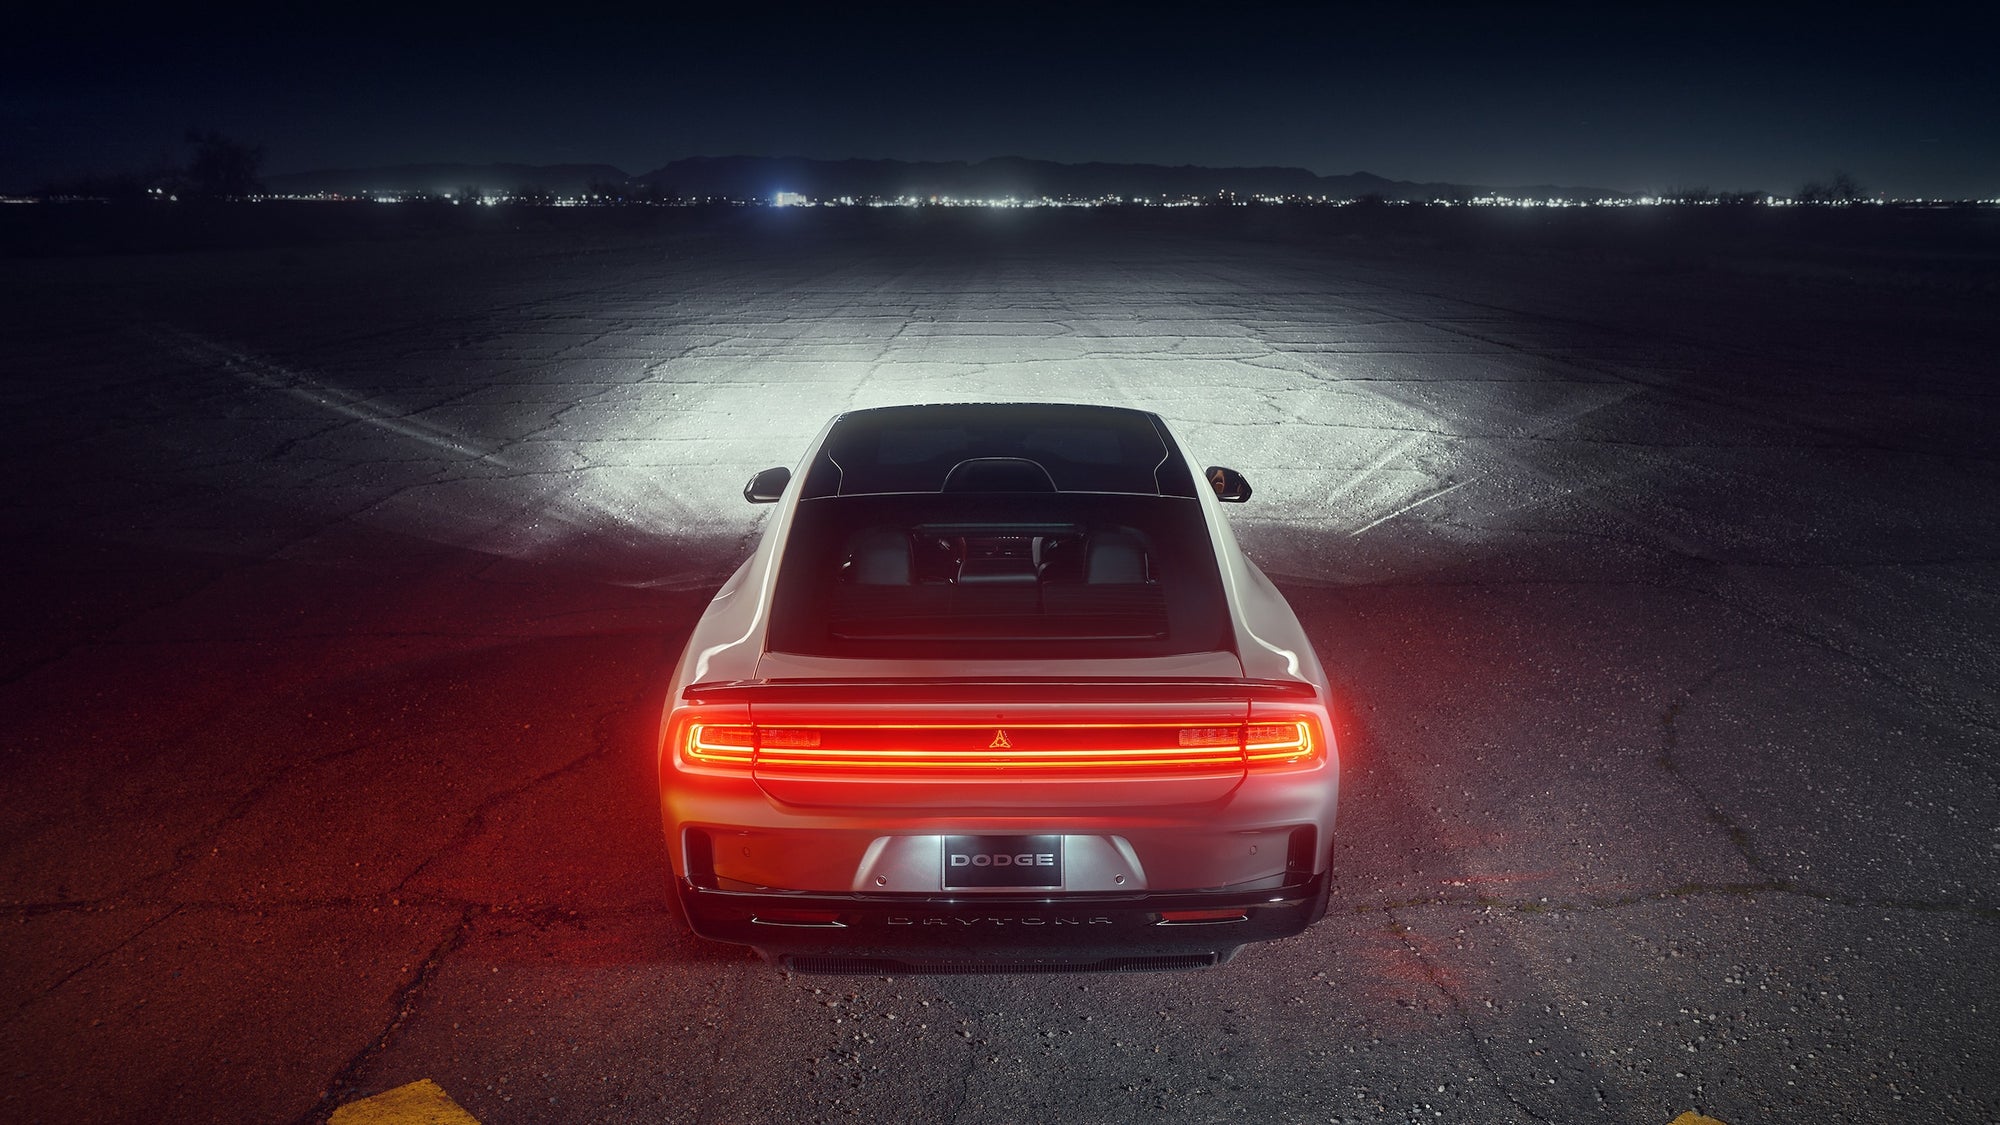 How do you feel about the latest model of the Dodge Charger?